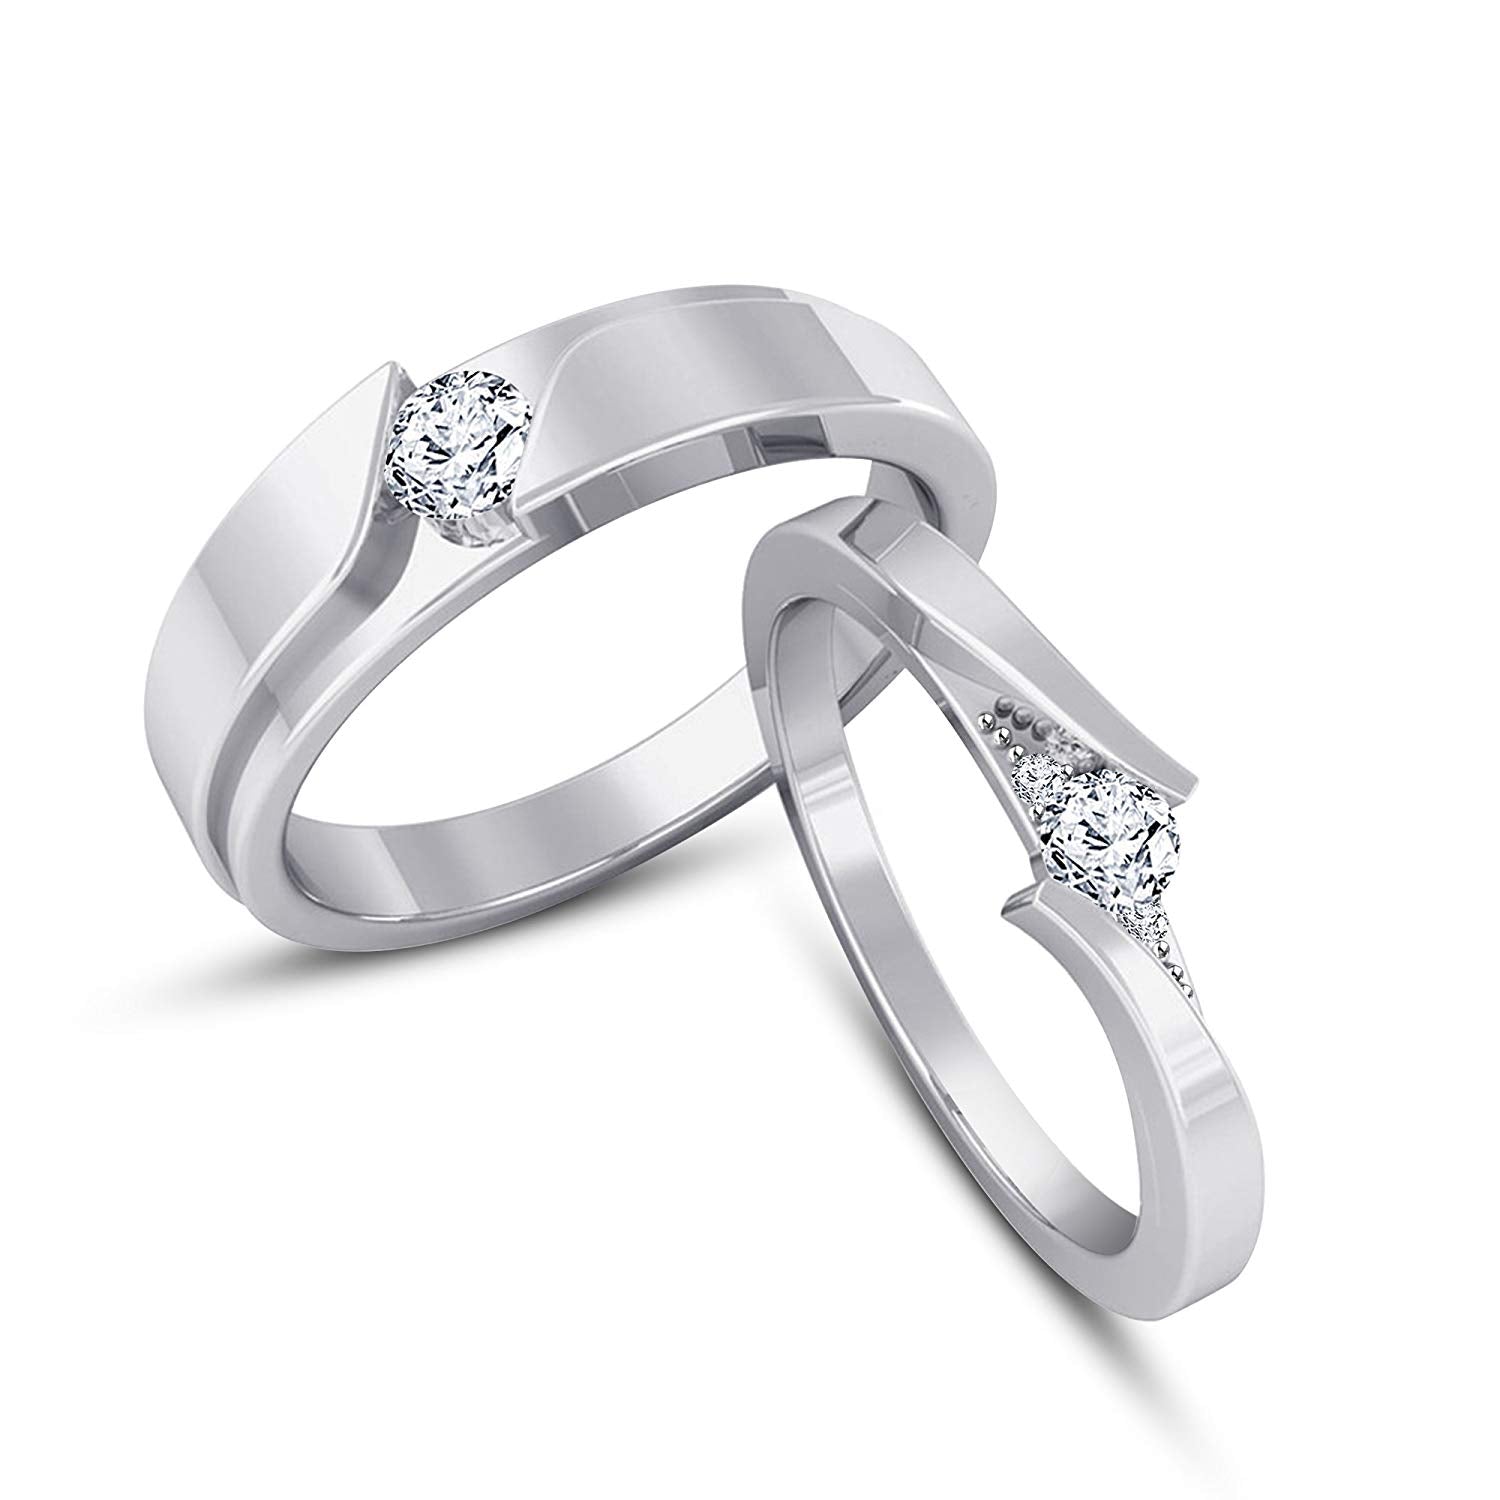 Buy Palmonas 925 Sterling Silver Sun Moon Couple Rings online